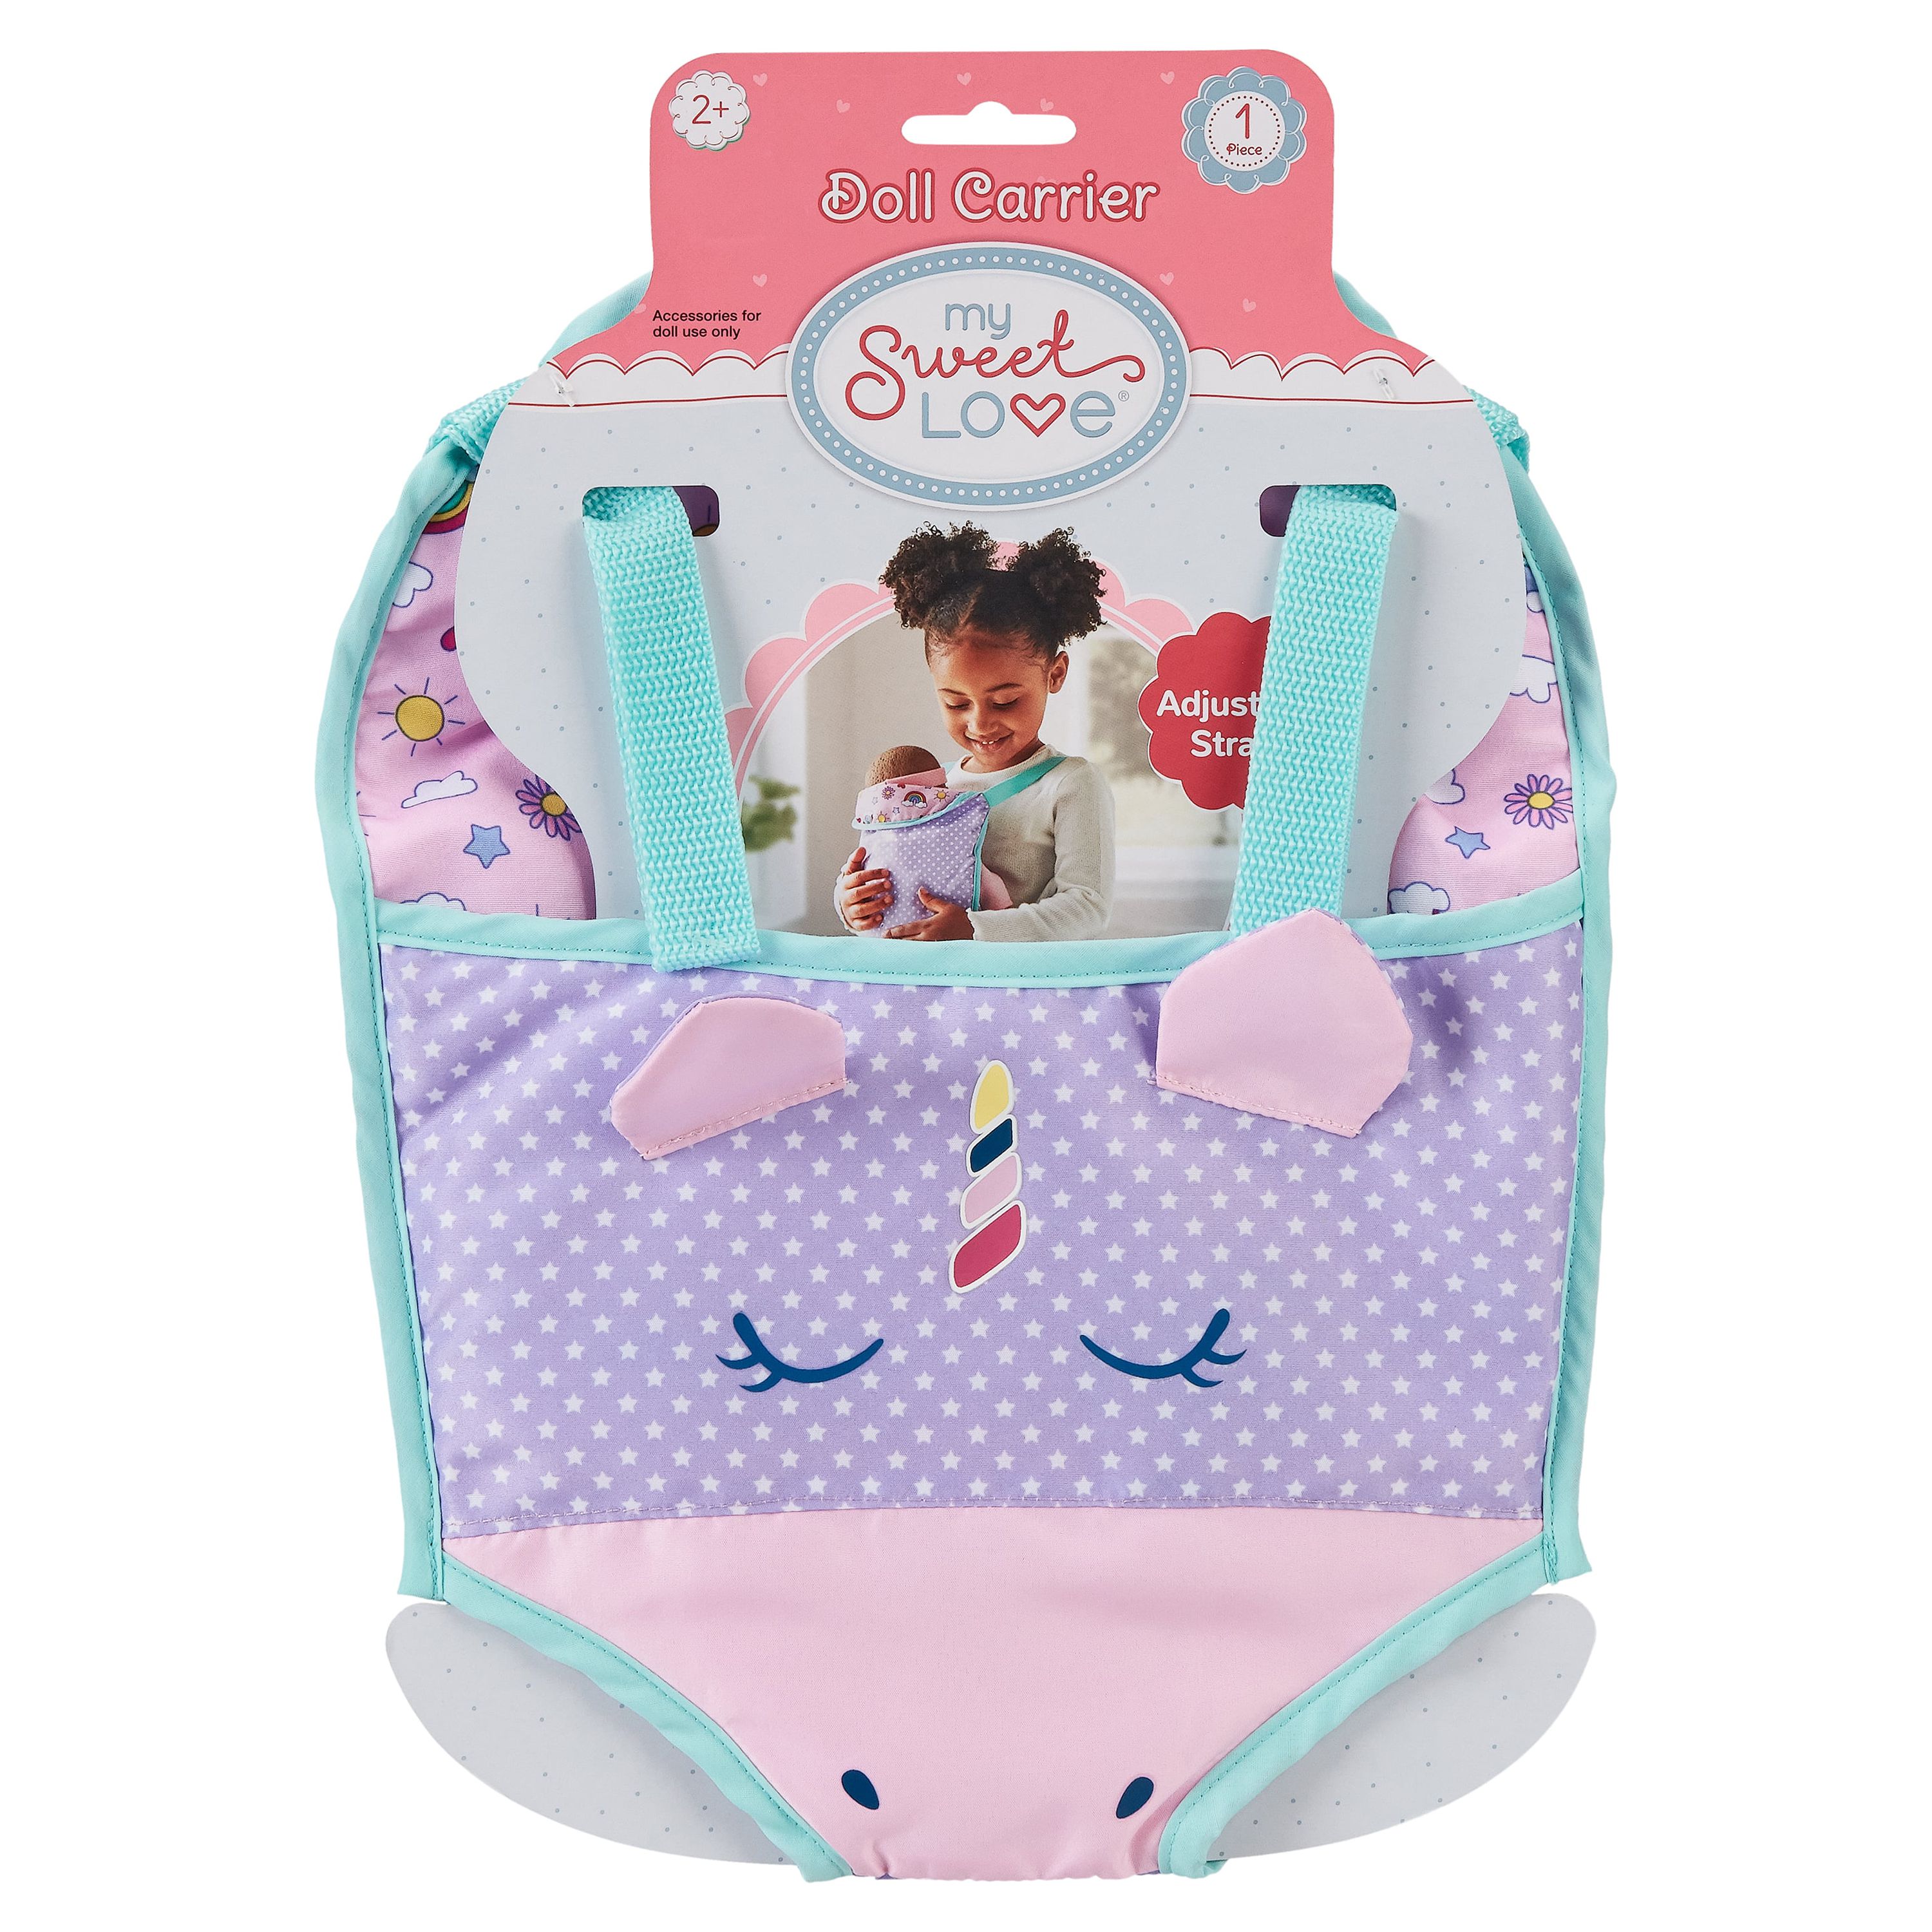 My Sweet Love 14" Baby Doll and Sling Carrier Play Set, 2 Pieces - image 4 of 5